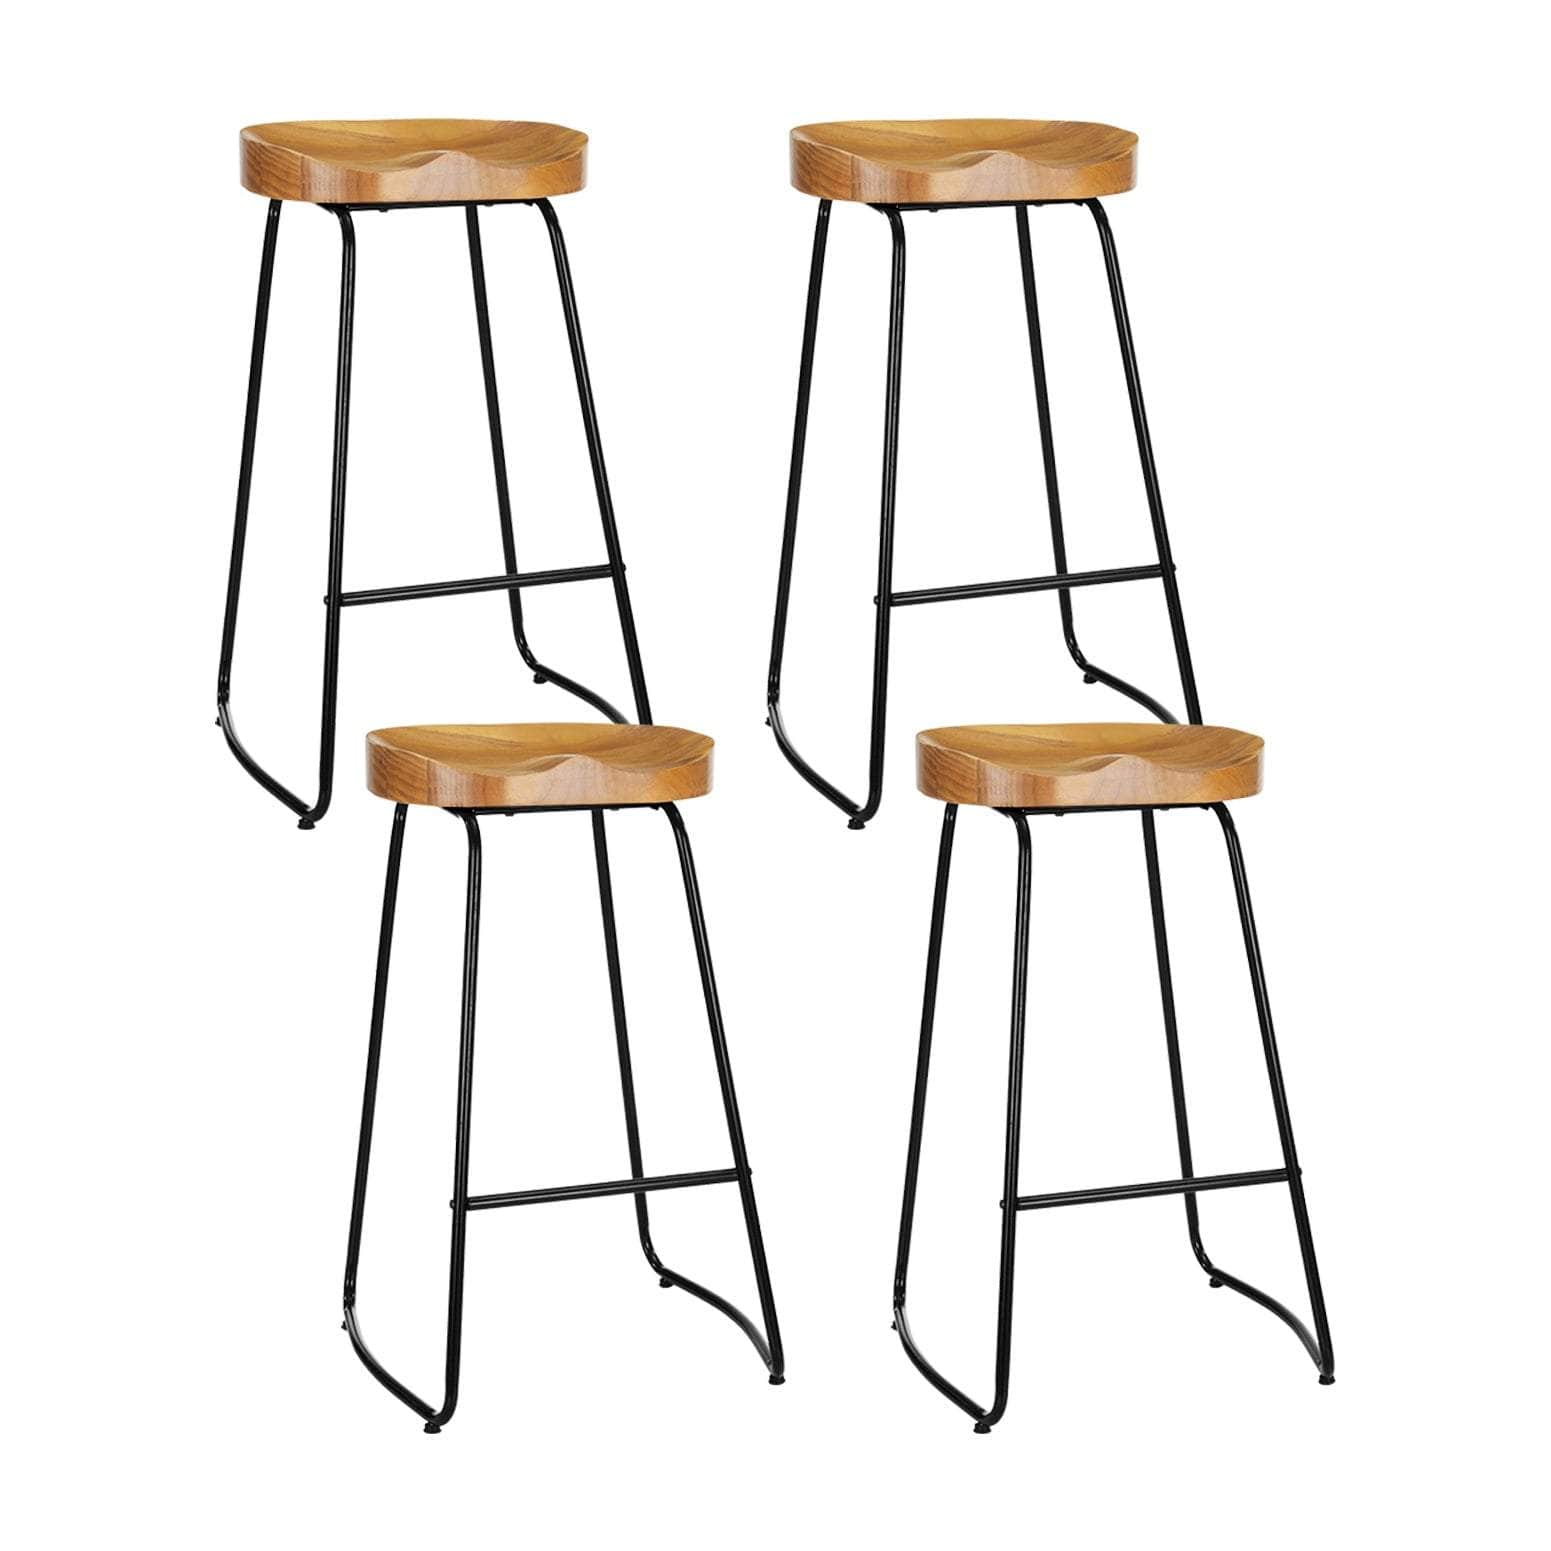 set of 4 Vintage Tractor Bar Stools Retro Bar Stool Industrial Chairs 75cm